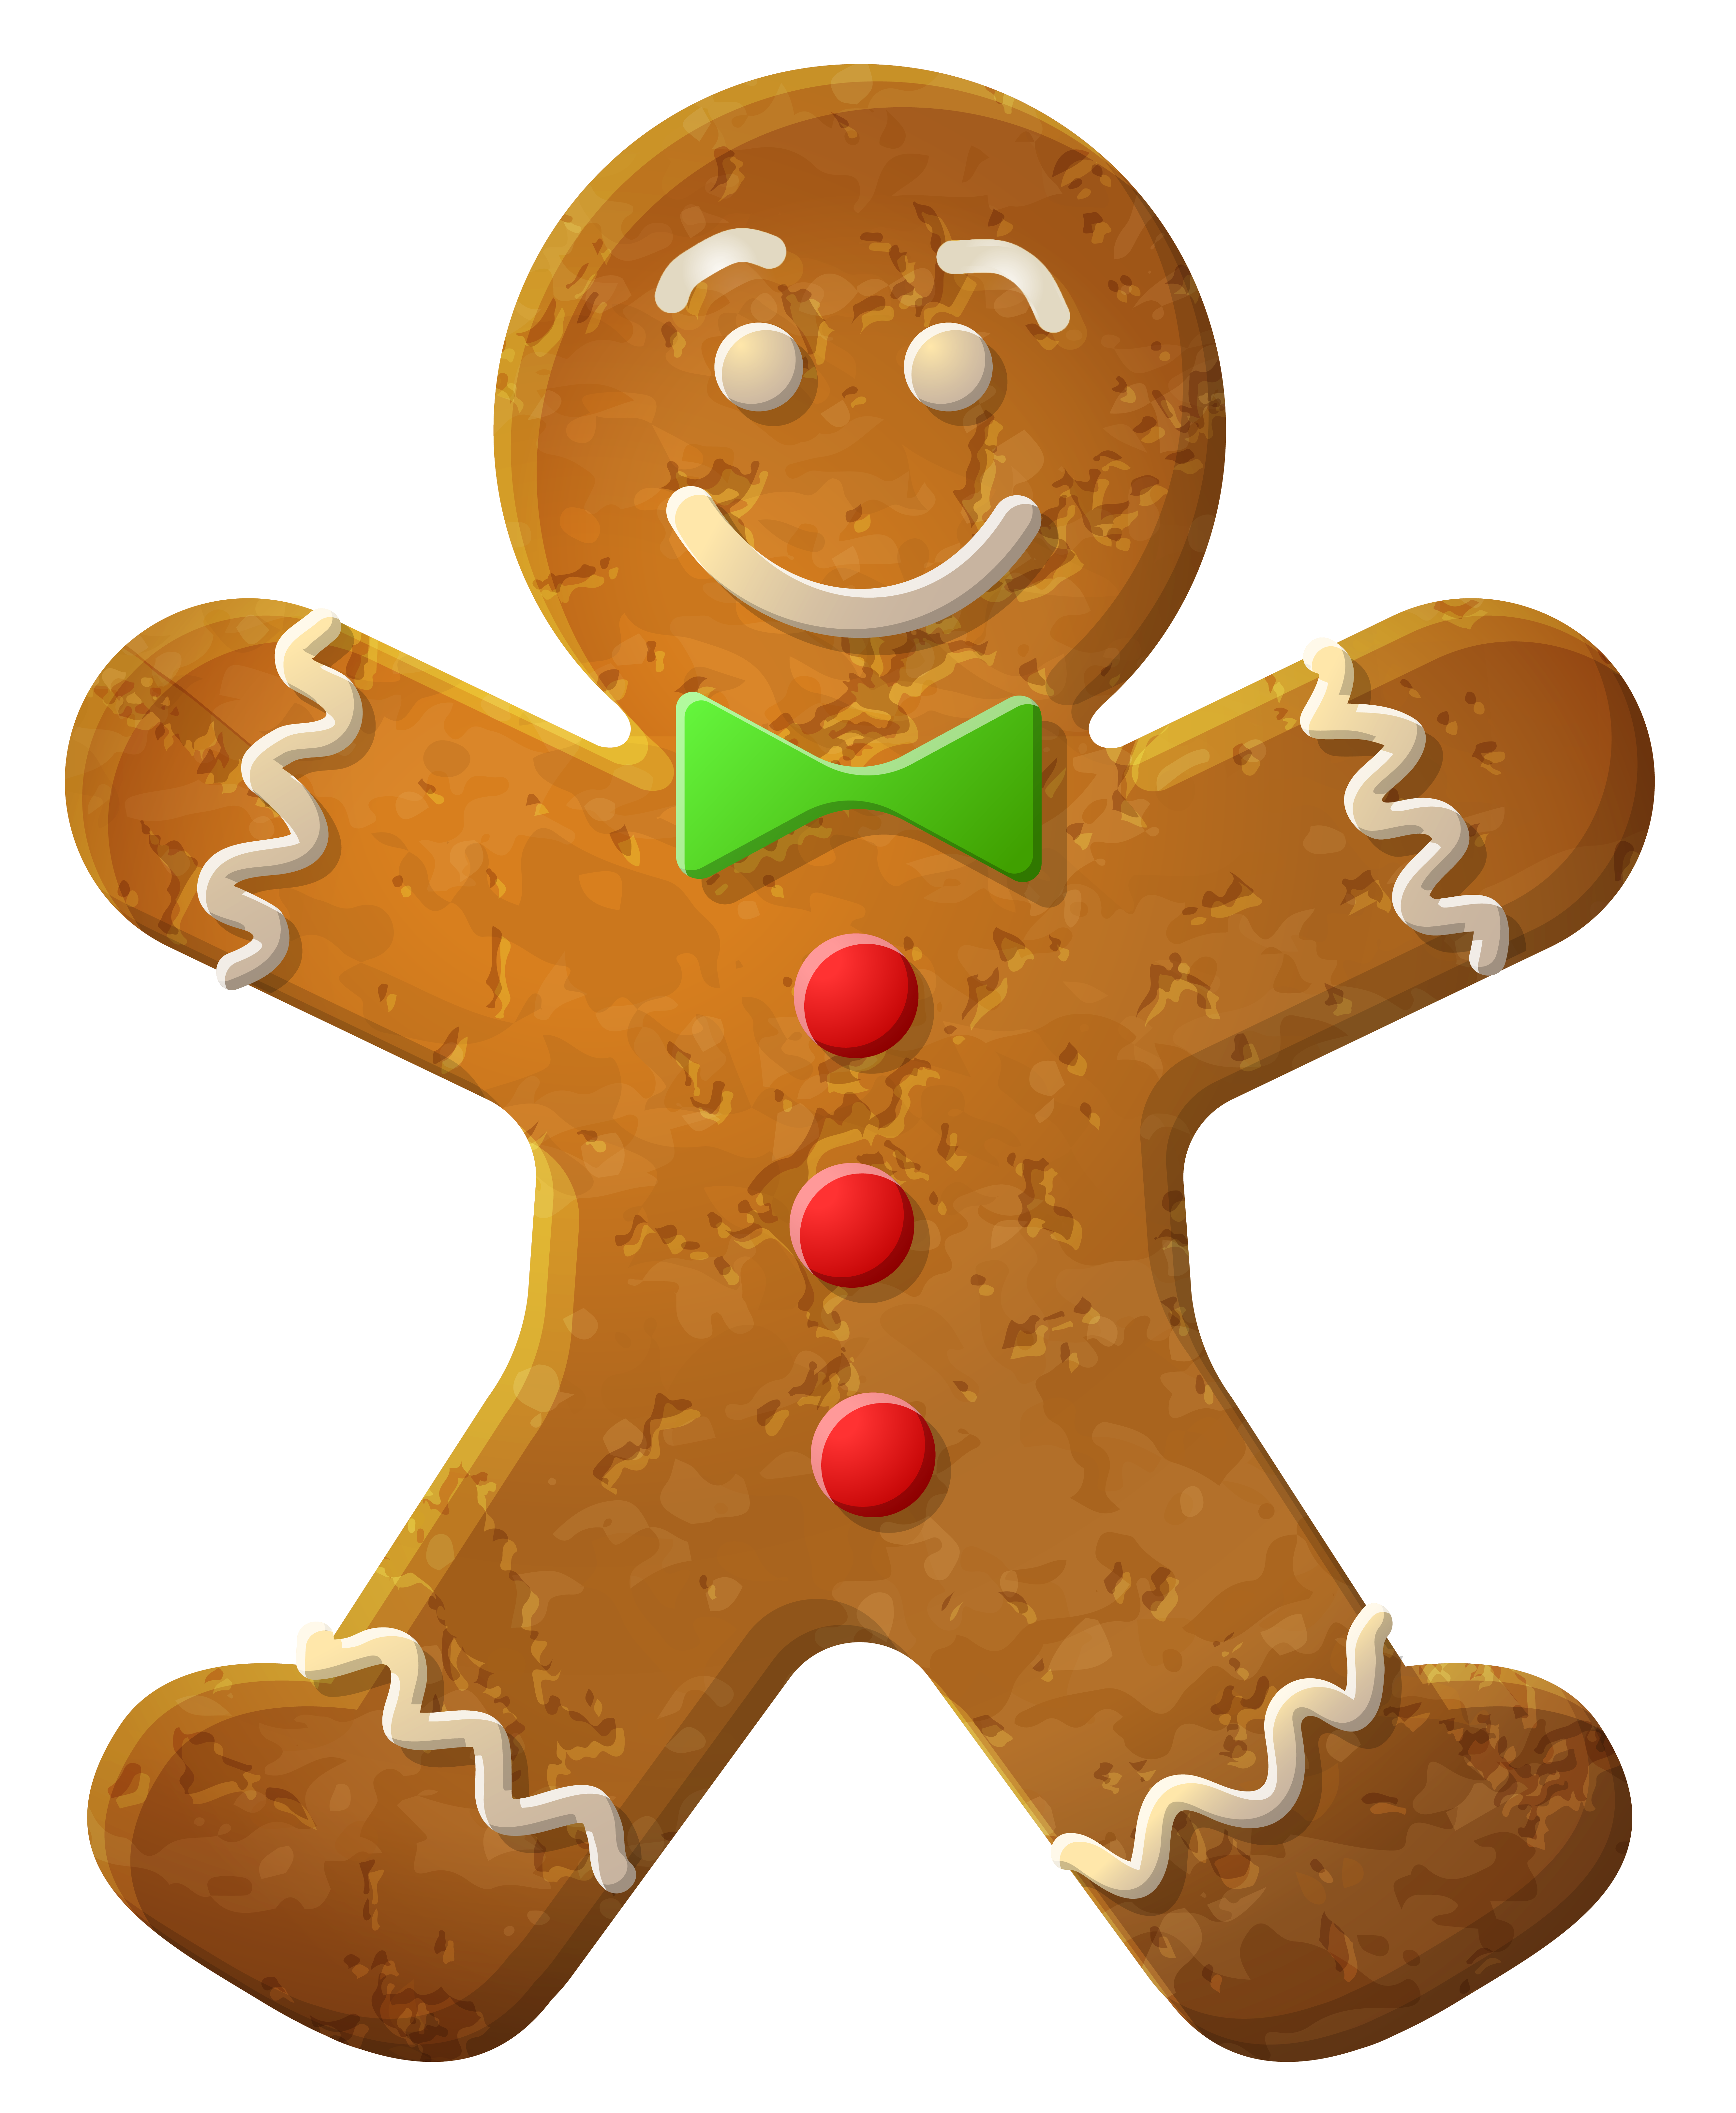 Gingerbread man silhouette at. Clipart cookies dessert